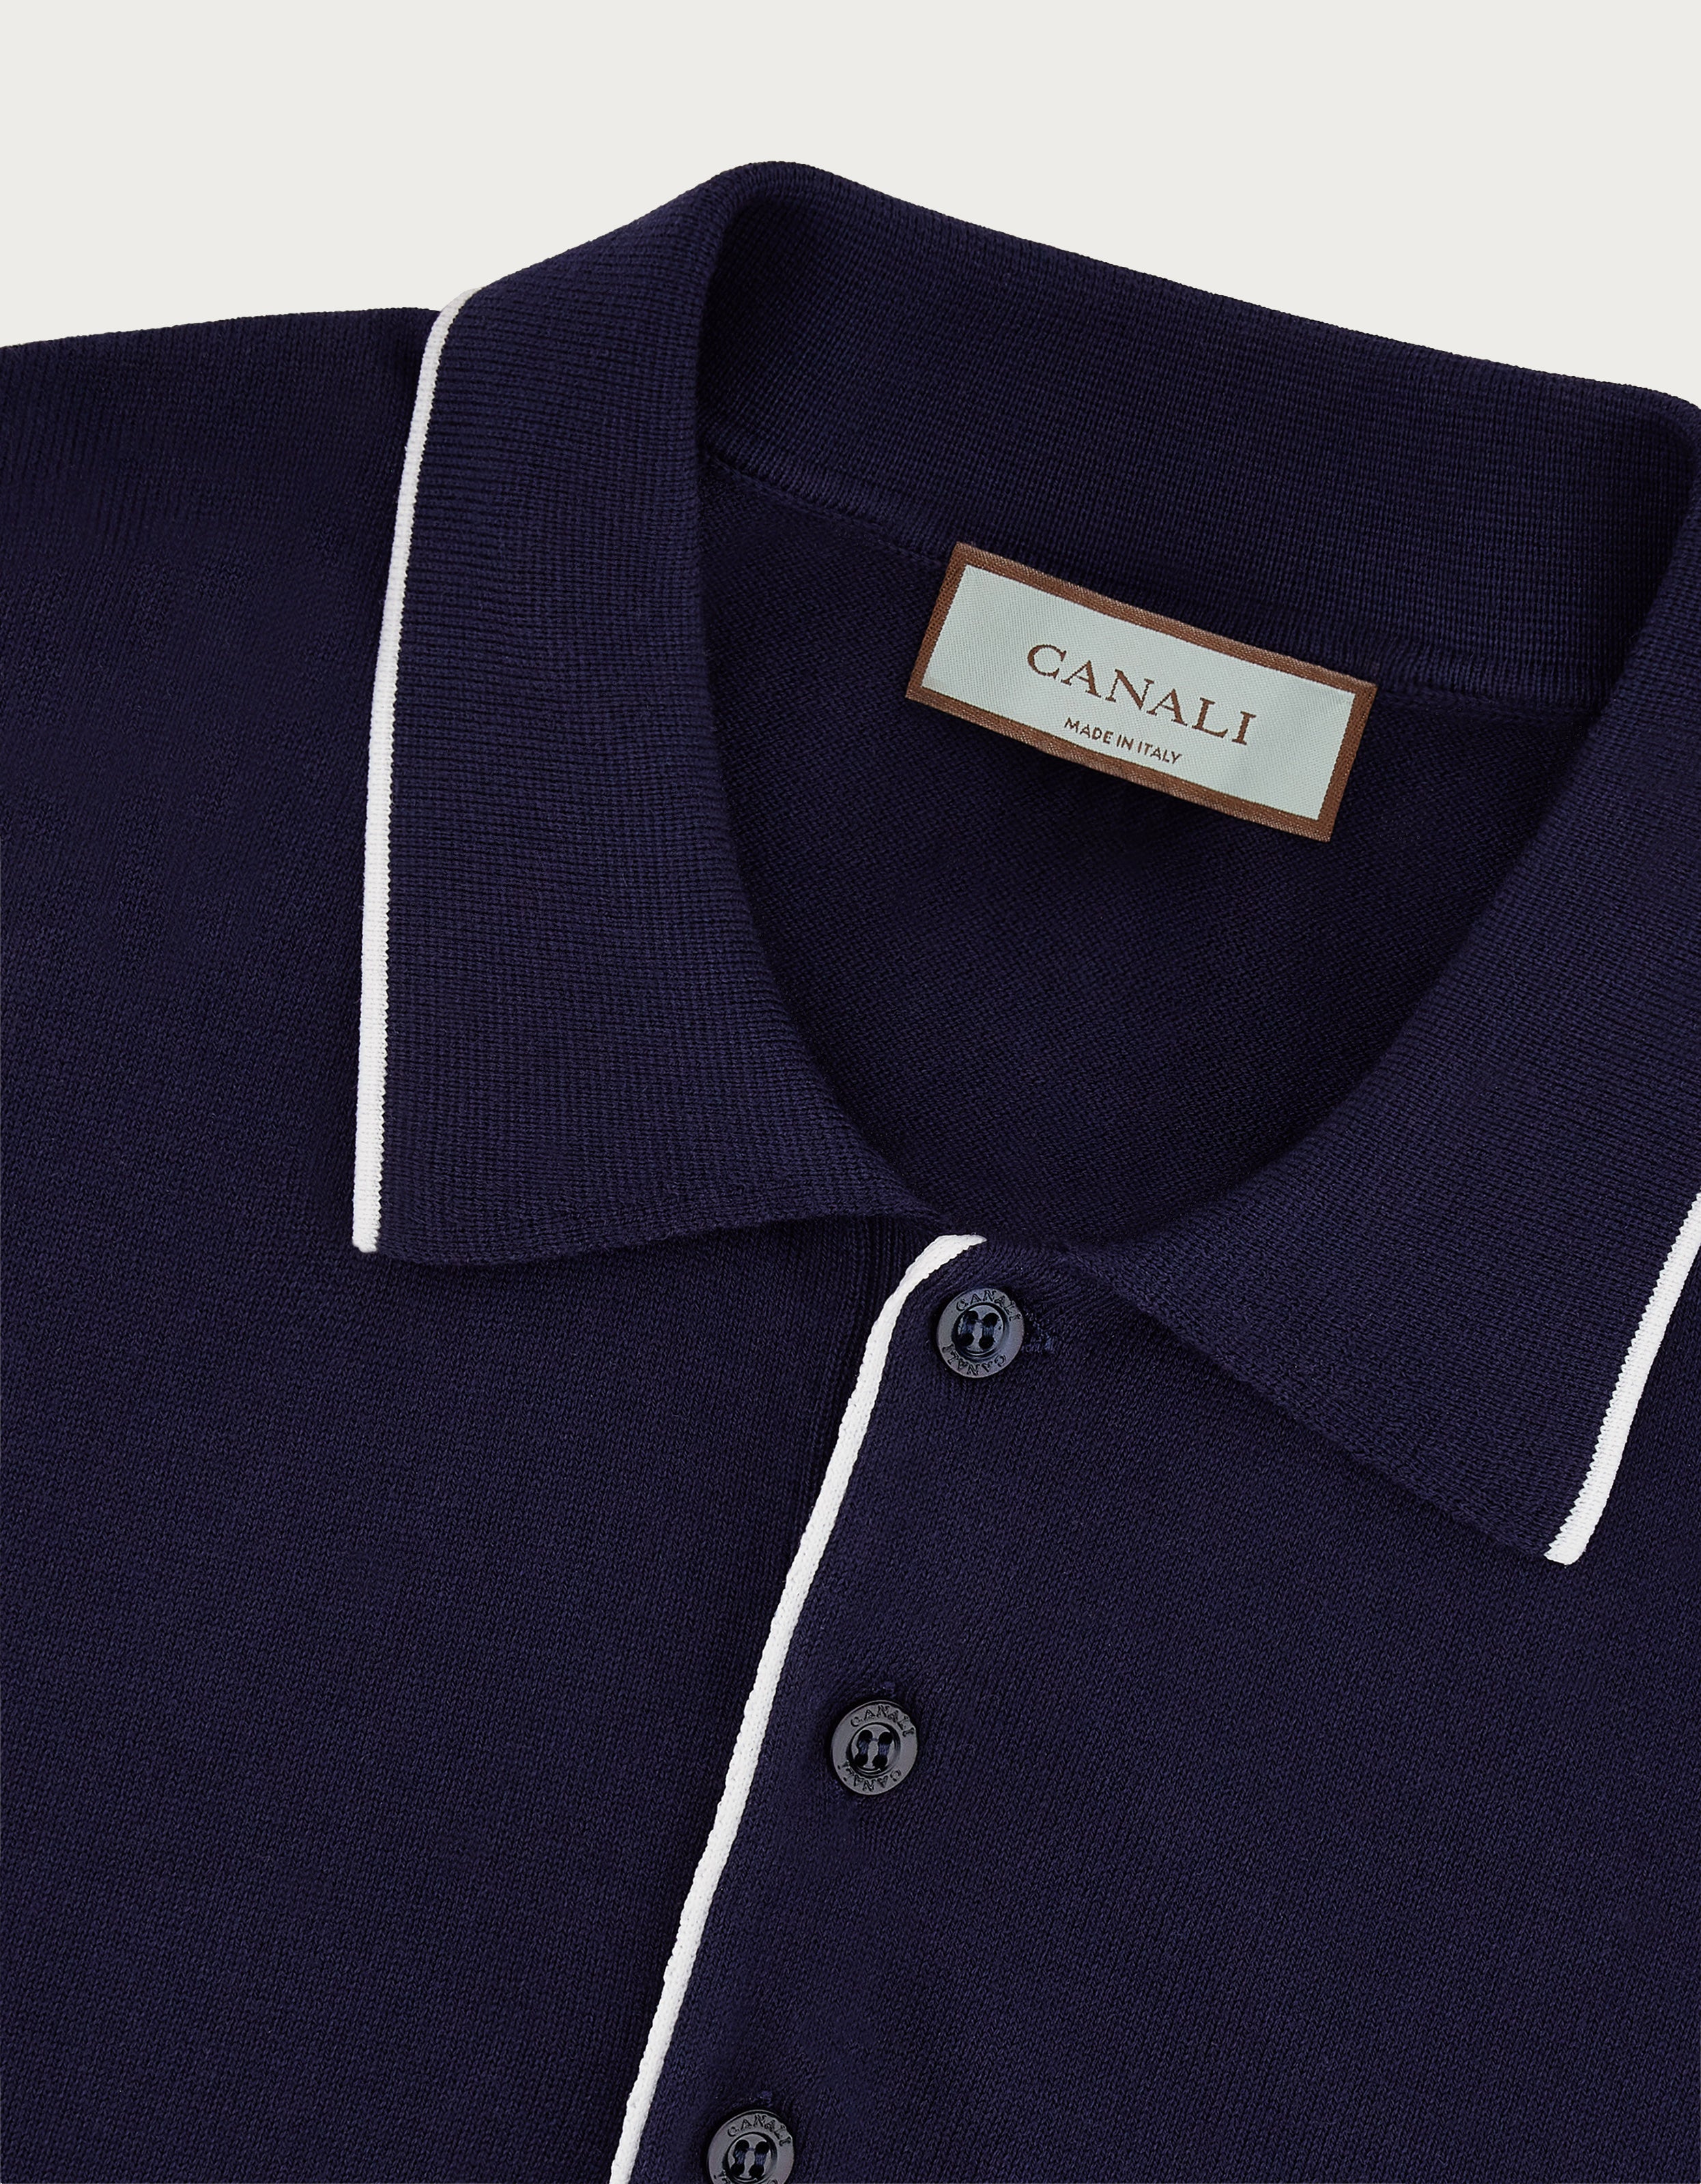 CANALI - Navy & White Knitted Shaved Cotton Polo Shirt C0997-MK01148-300